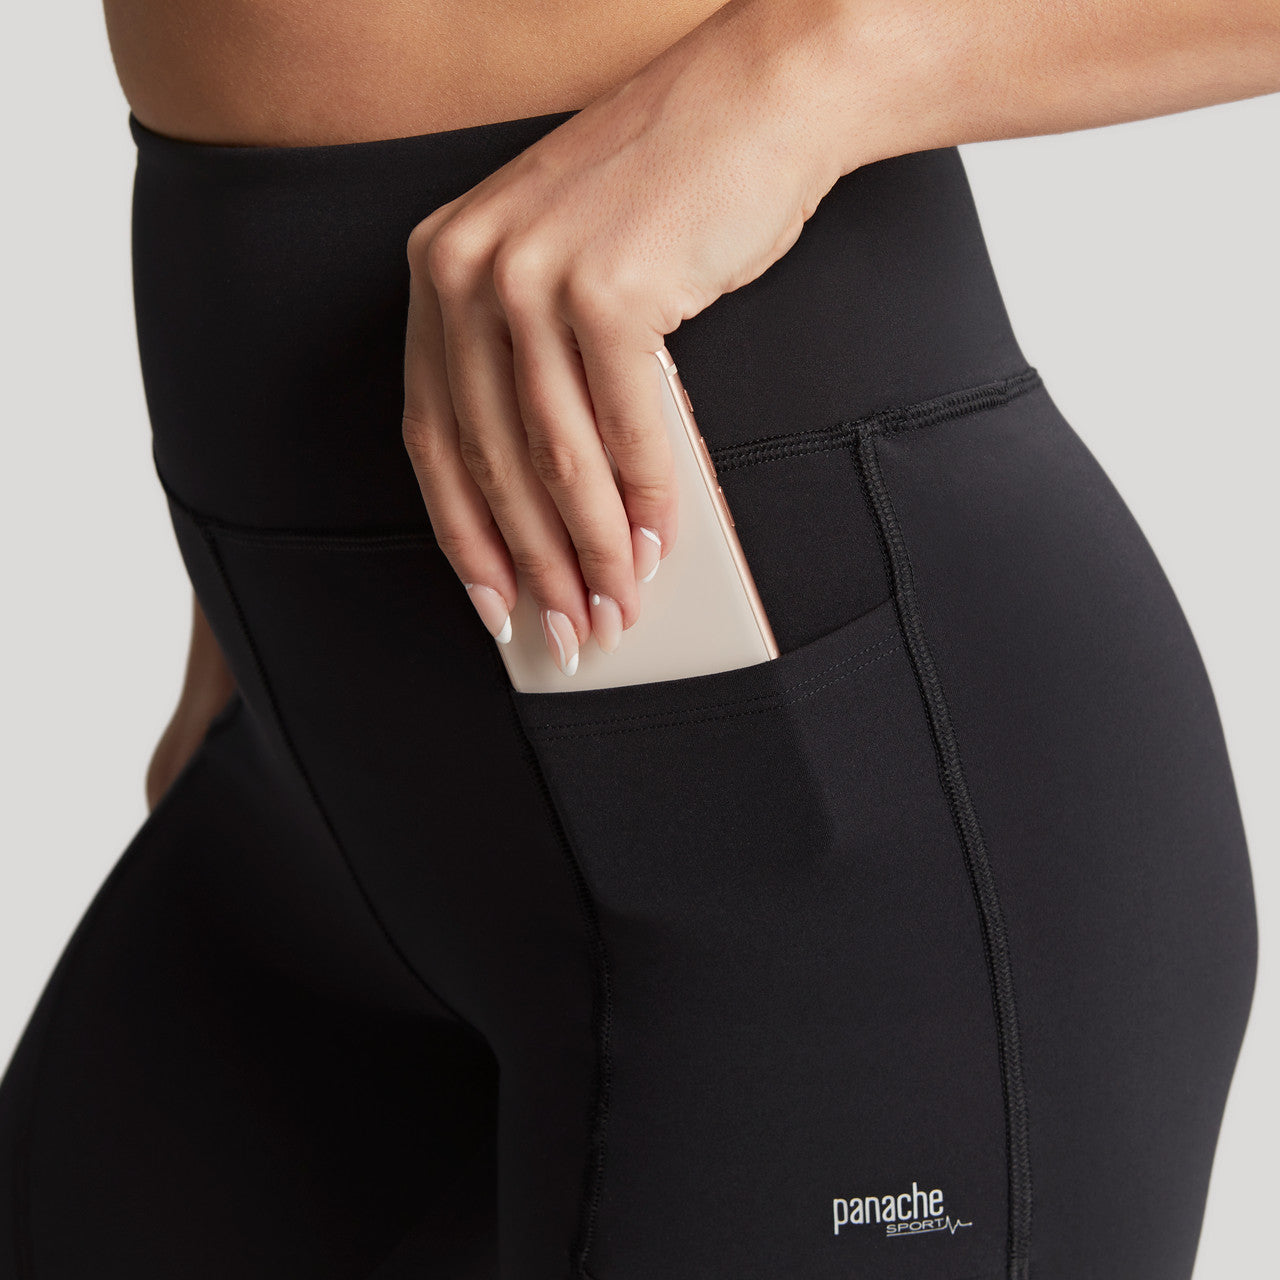 Ultra Adapt Sports Legging - Black worn by model close up view